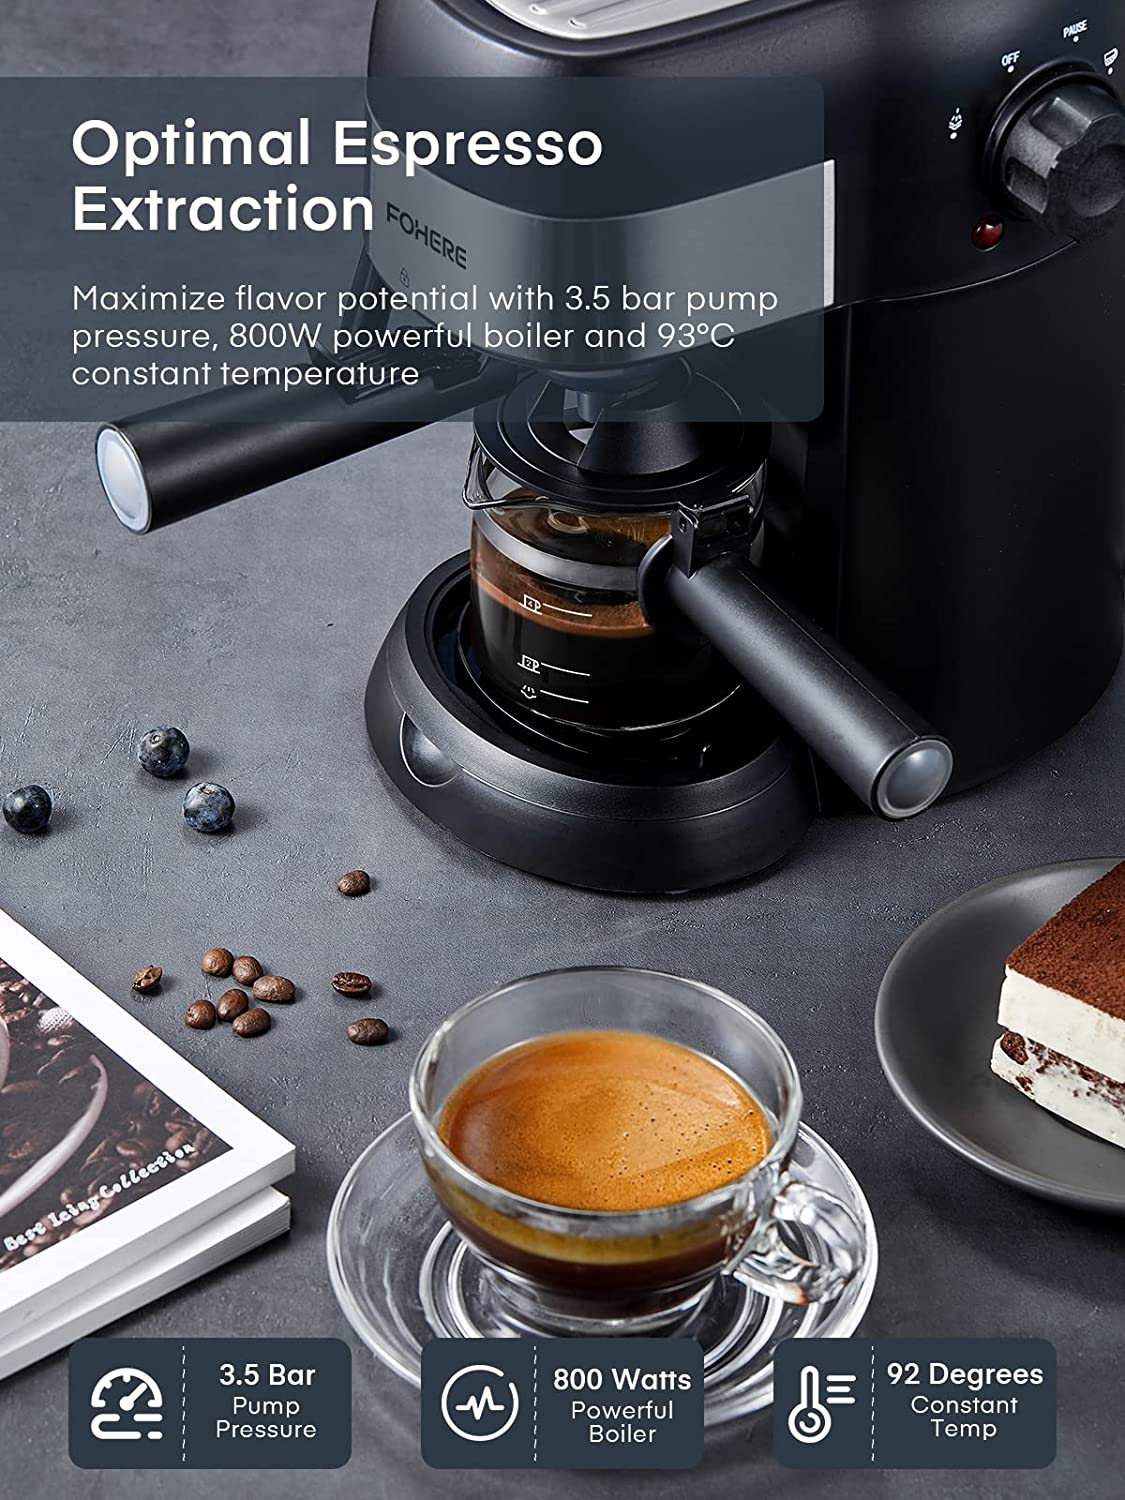 optimal espresso extraction, FOHERE Espresso Machine, 3.5 Bar 4 Cup Steam Espresso Machine, Espresso and Cappuccino Maker with Milk Frother and Carafe, Professional Compact Coffee Machine for Espresso, Cappuccino, Latte and Mocha